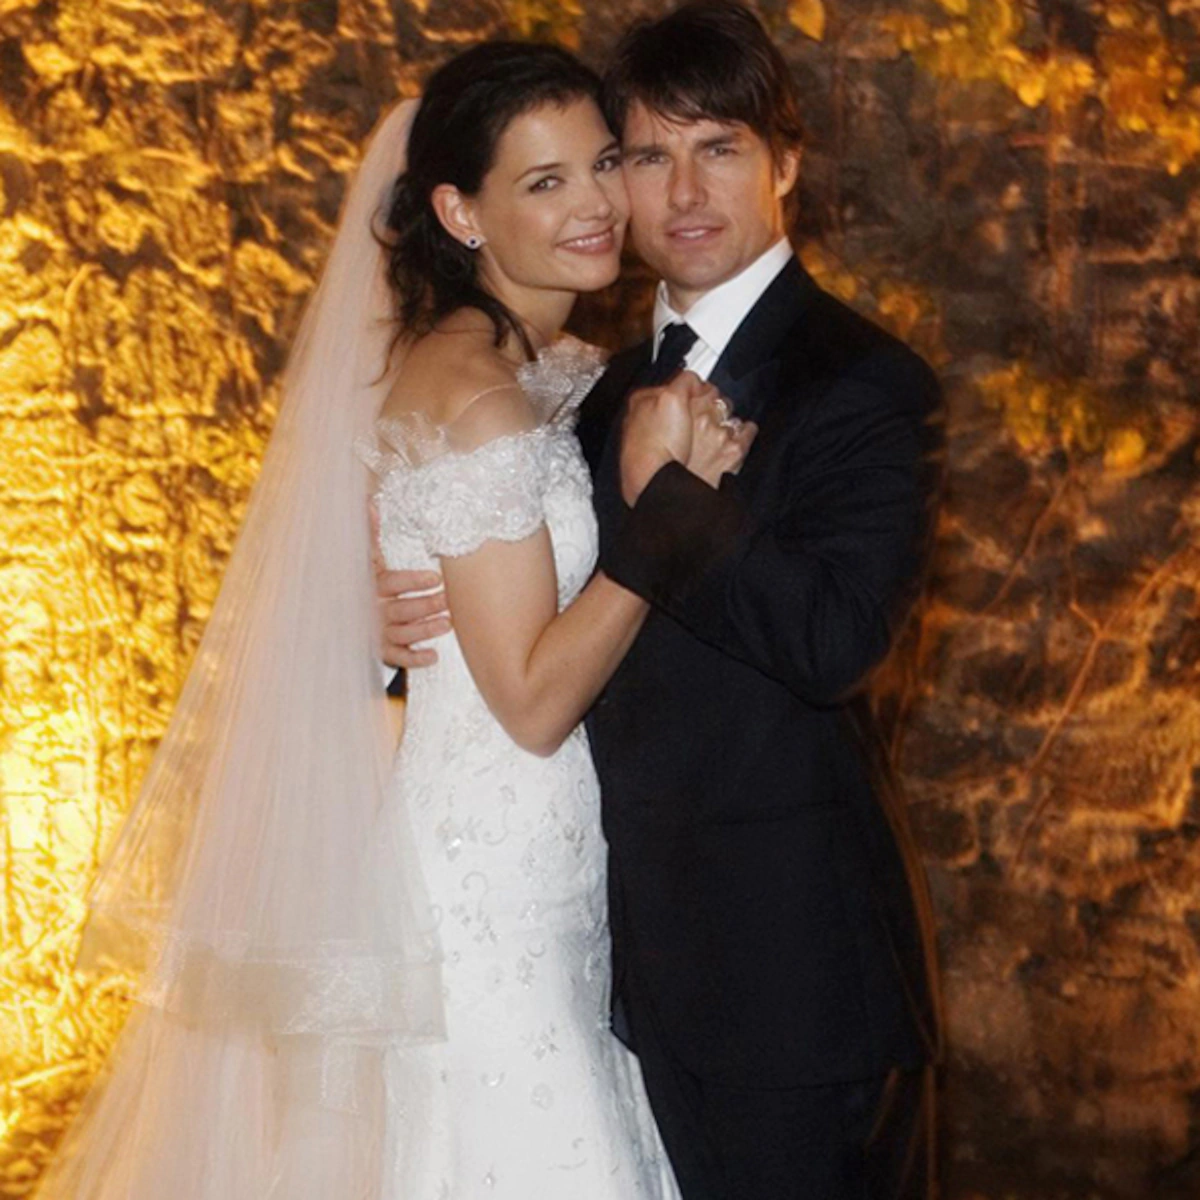 Tom Cruise and Katie Holmes celebrity wedding took place in Italy.